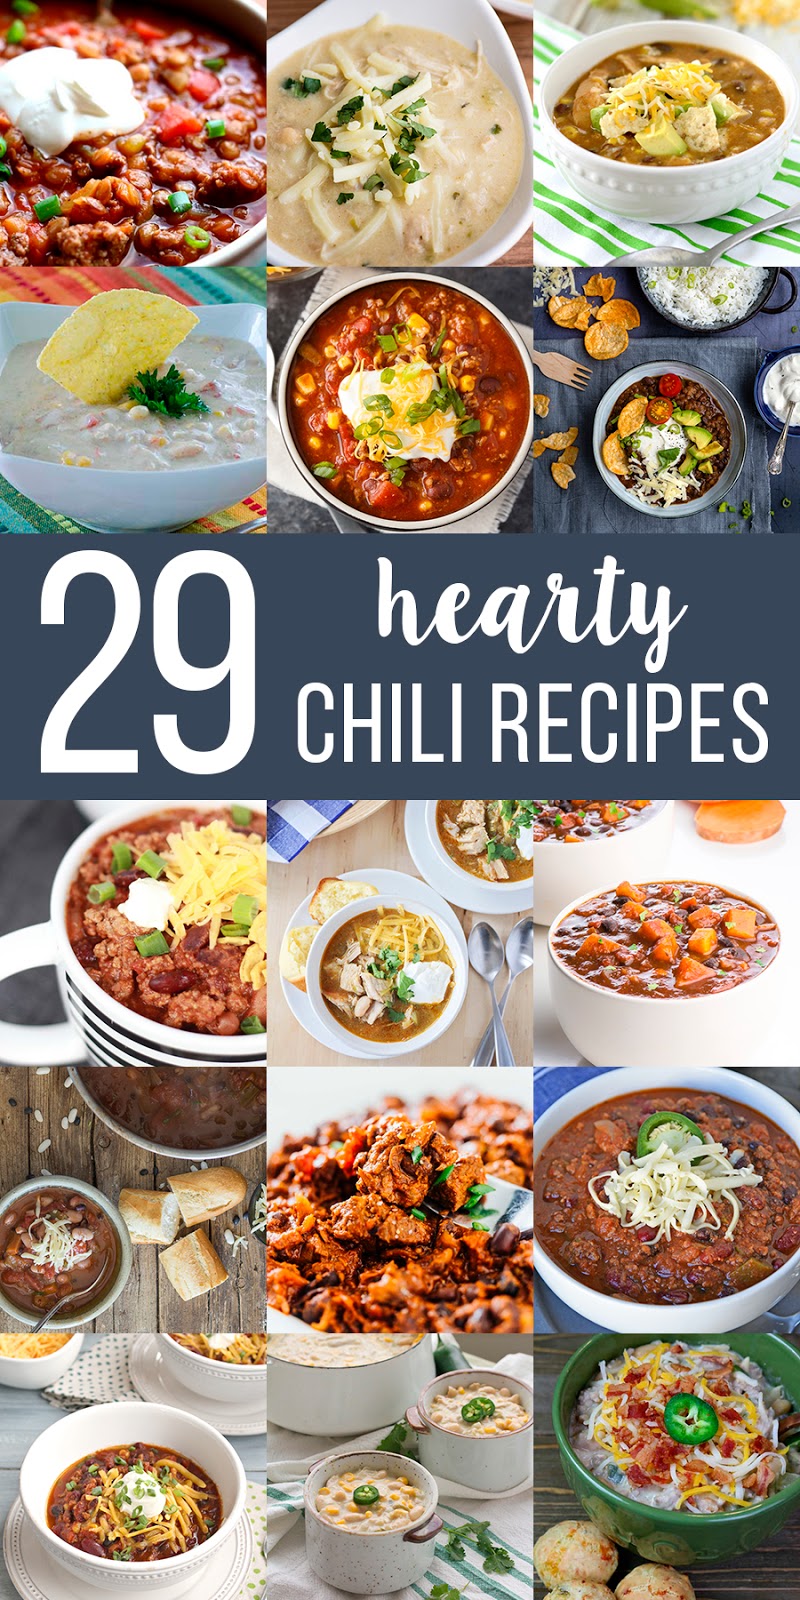 29 hearty and delicious chili recipes, perfect for a cold night!